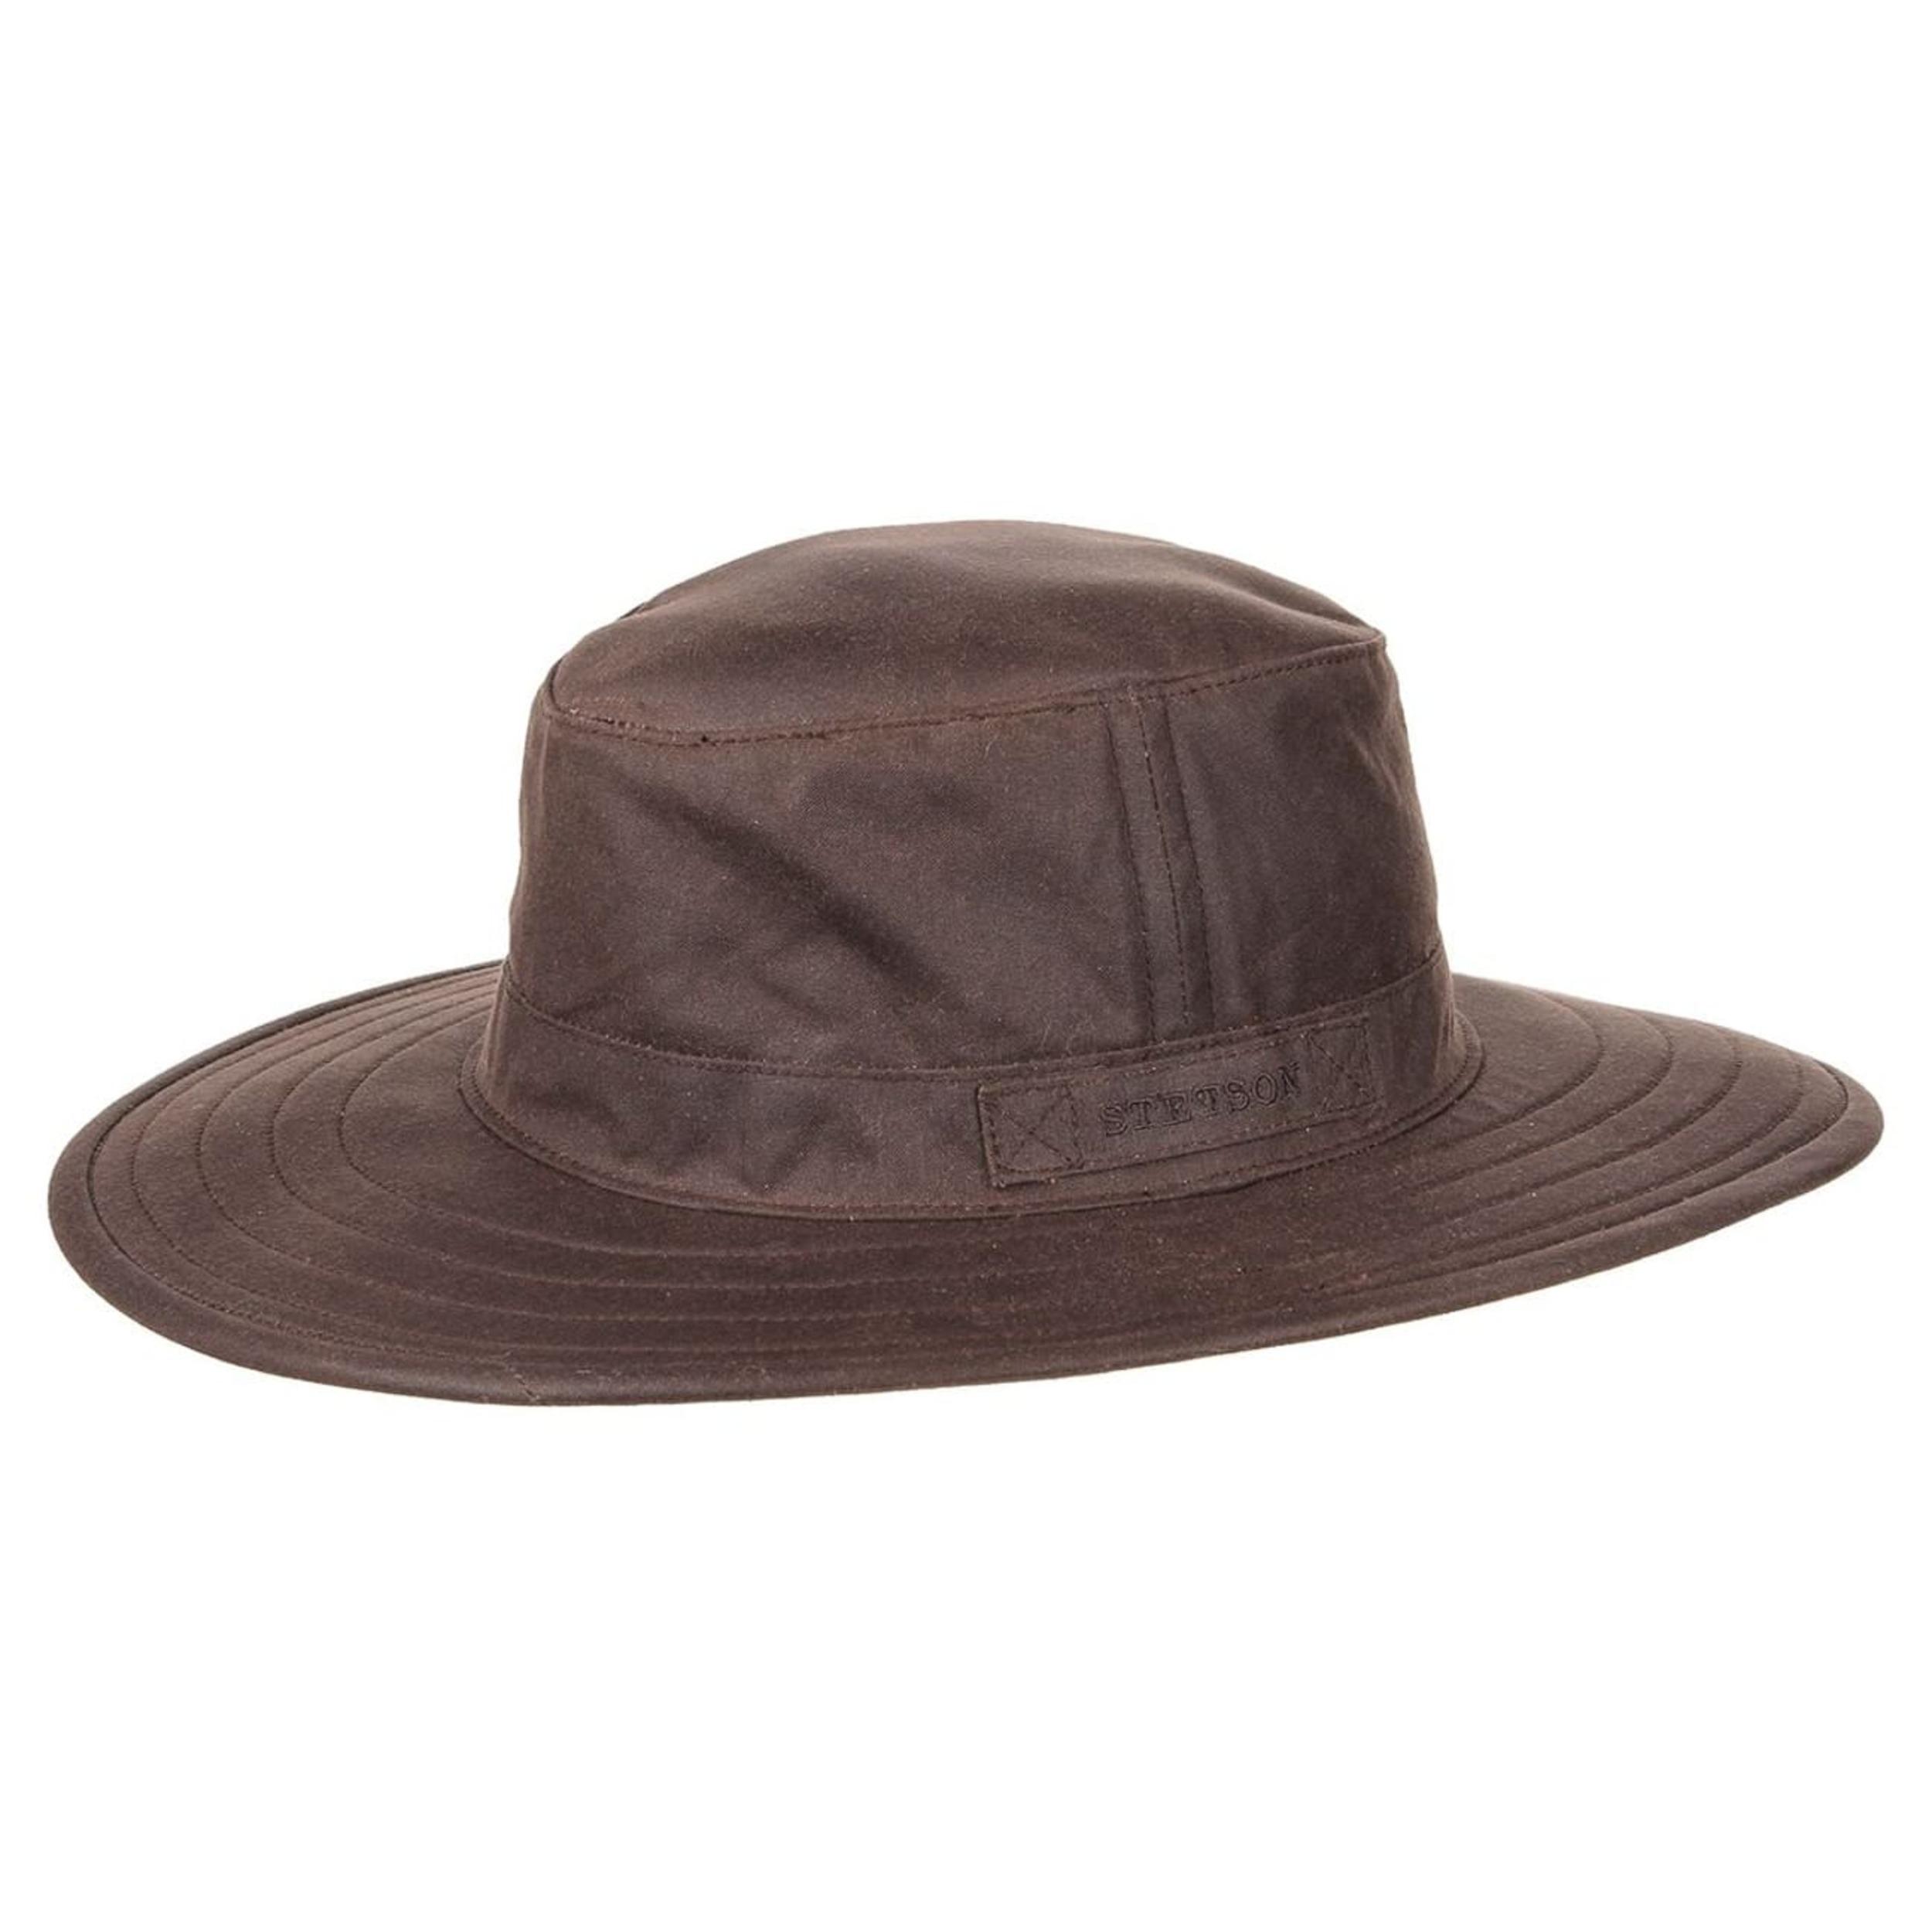 Pompano Waxed Cotton Hat by Stetson - 69,00